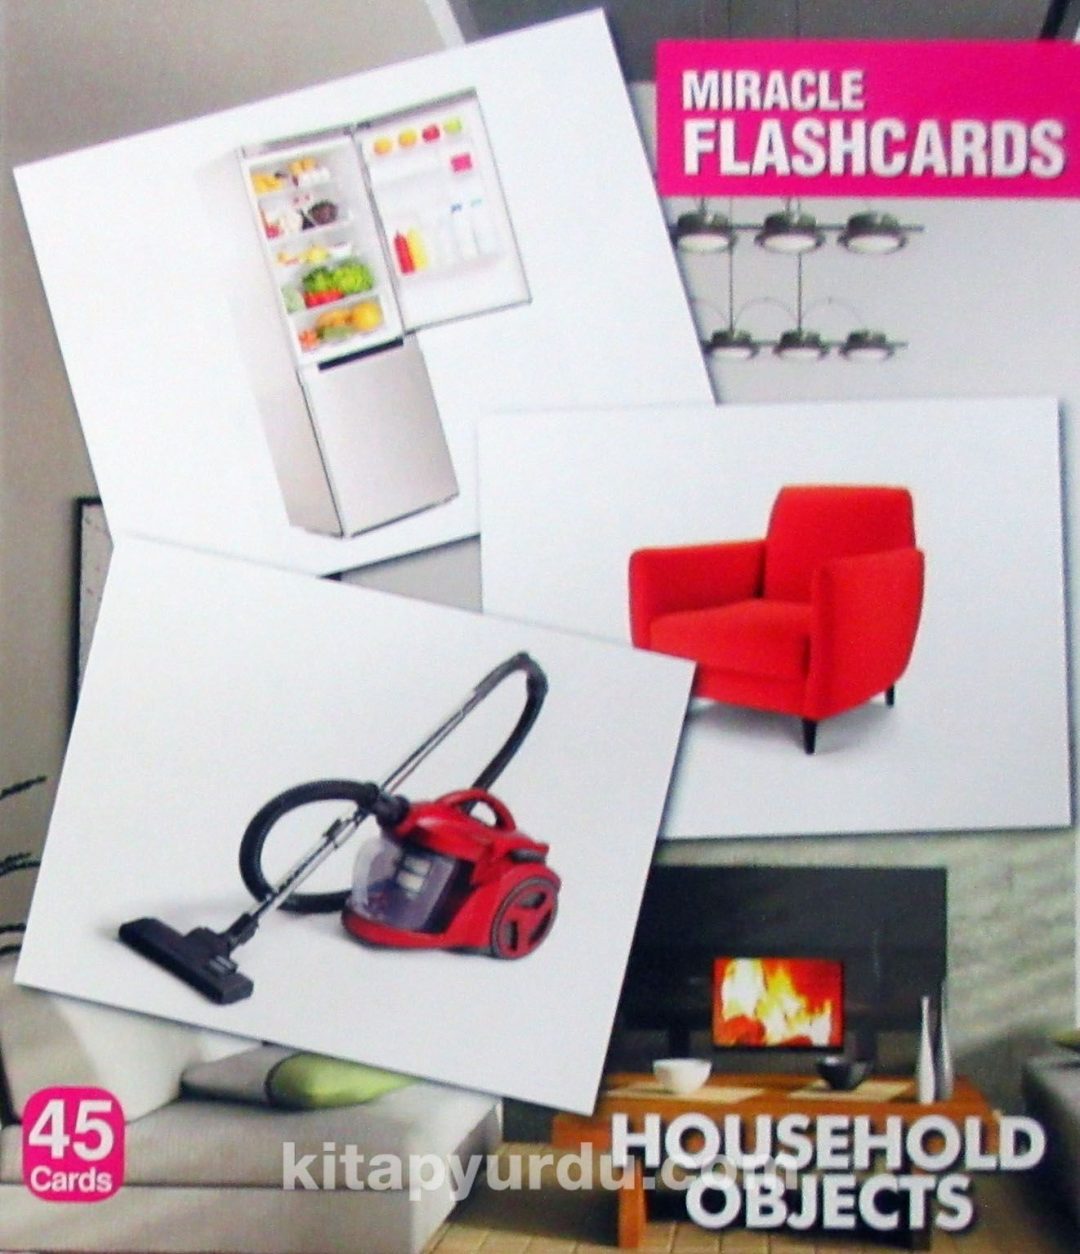 Miracle Flashcards Charts Household Objects (45 Cards)